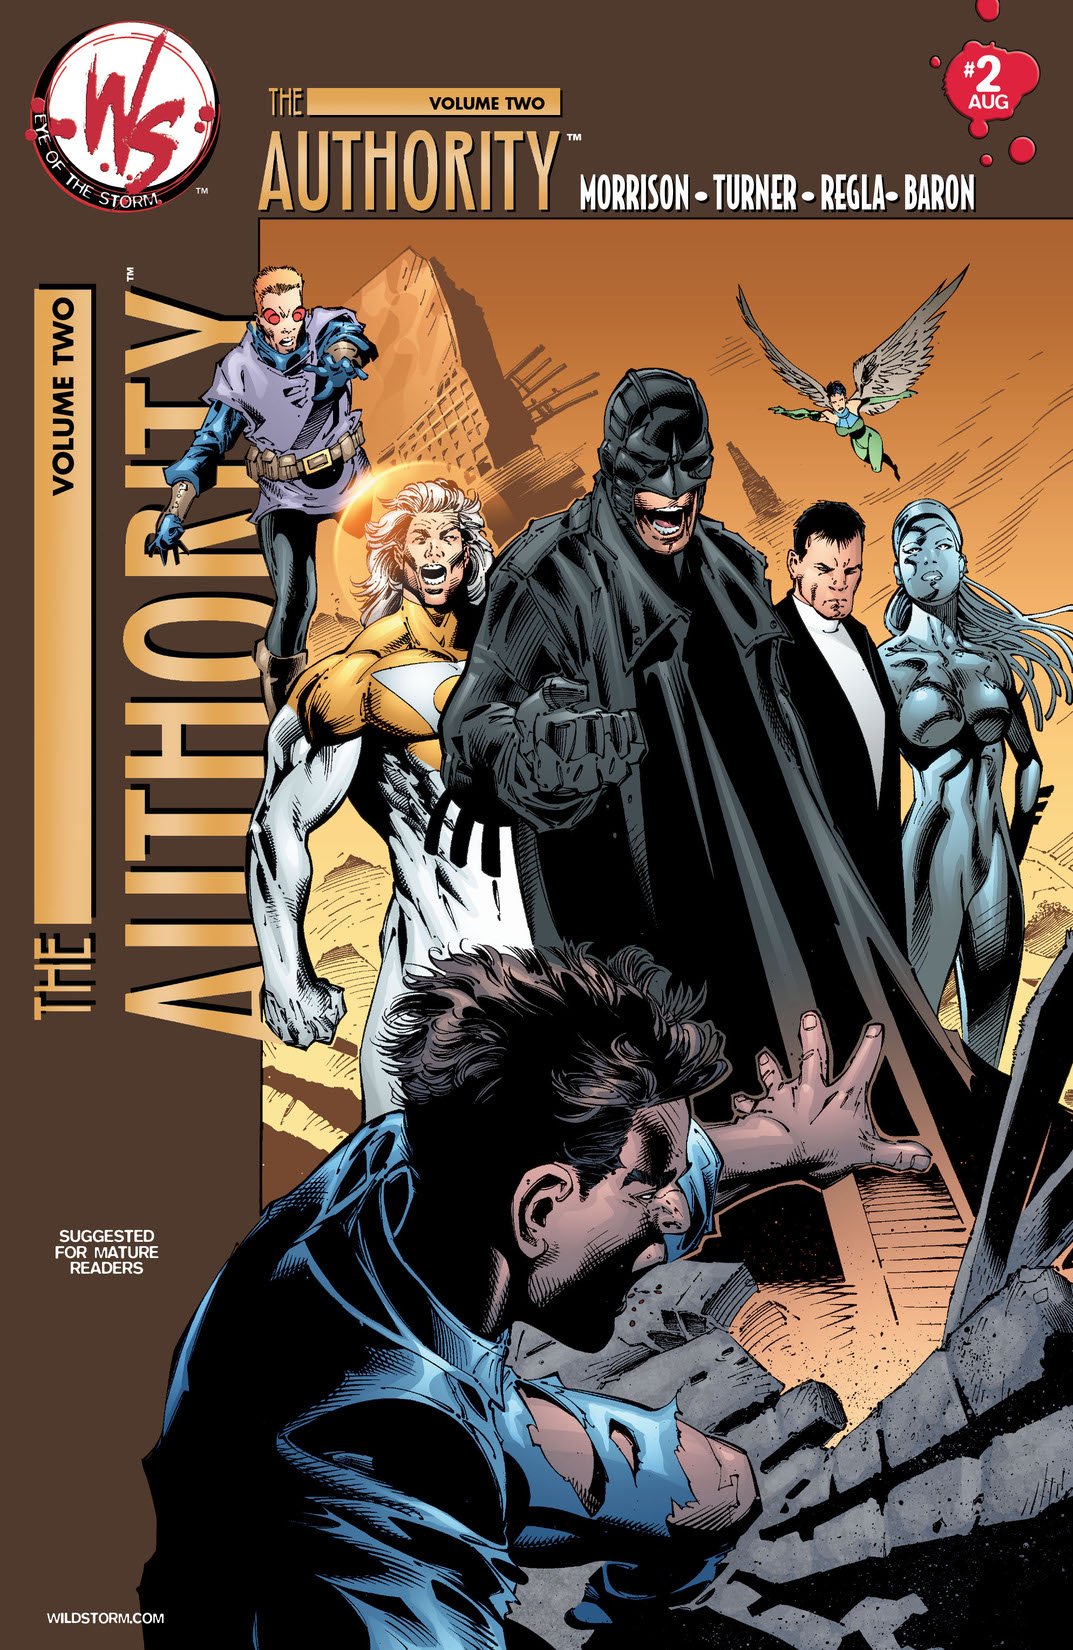 The Authority (2003-2004) #2 preview images